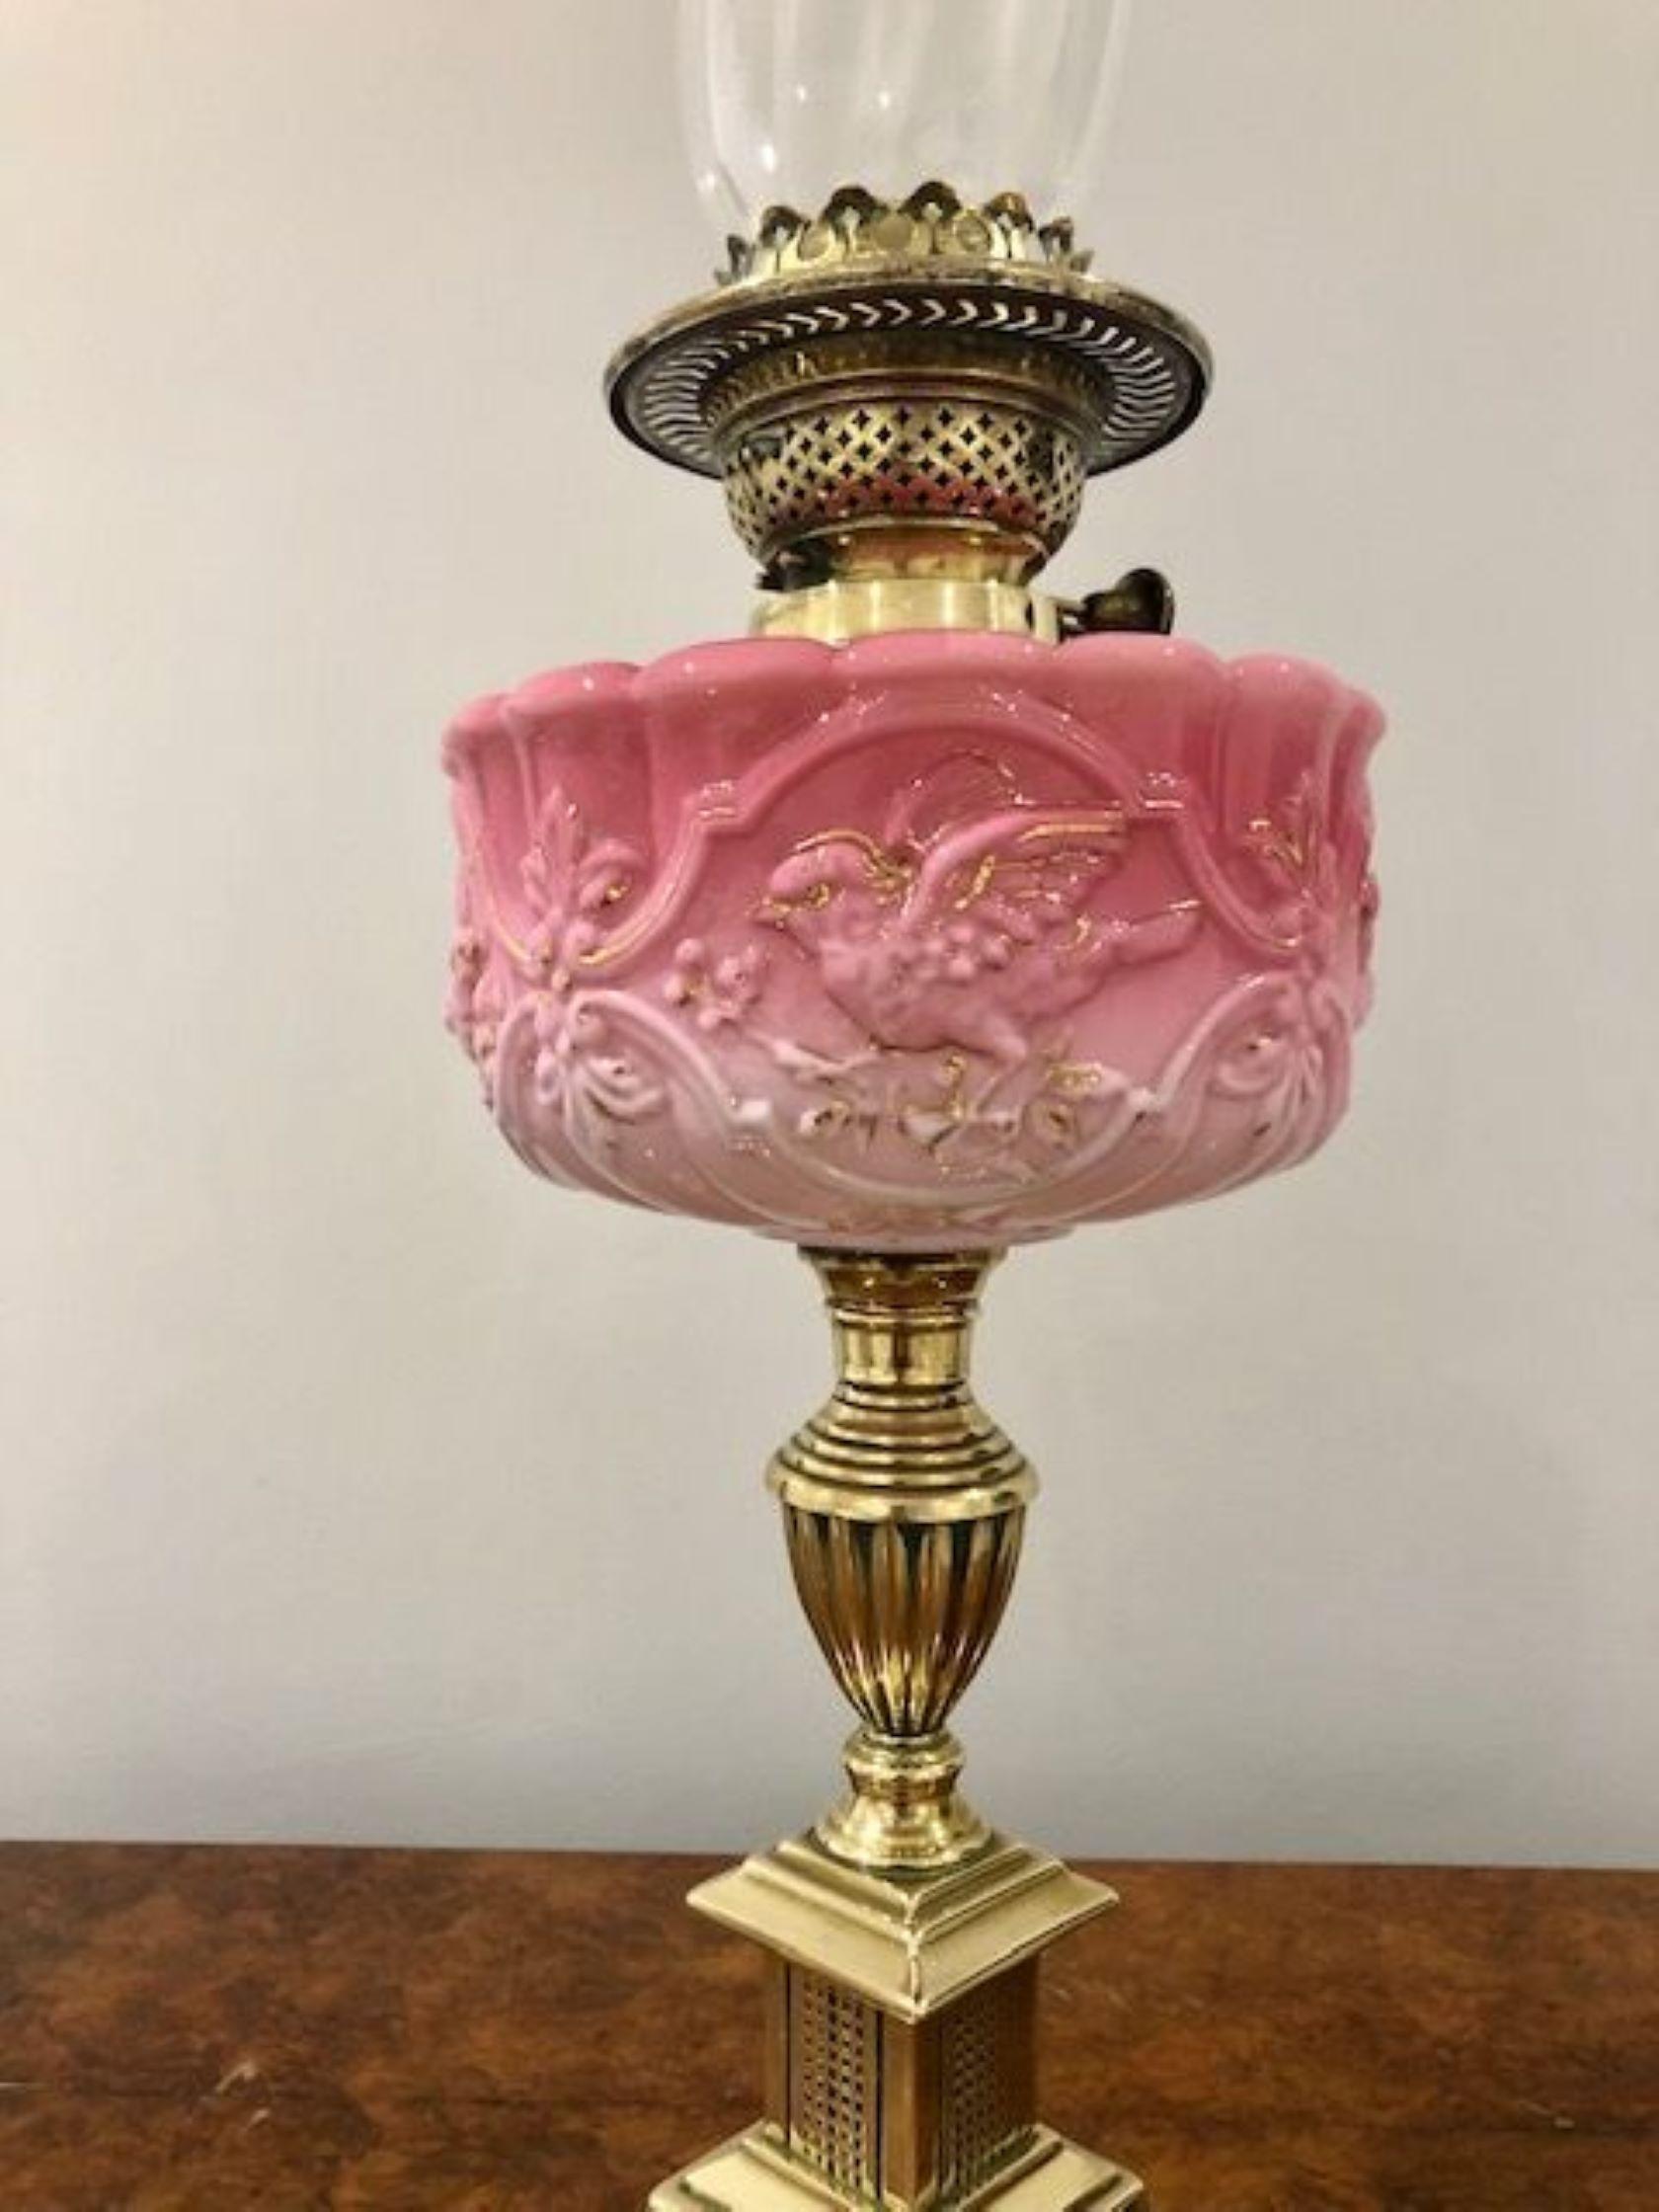 Superb quality antique Victorian oil lamp having a quality decorated glass shade and glass chimney with a double brass burner, lovely ornate pink glass reservoir supported by a brass turned column standing on a square stepped base 